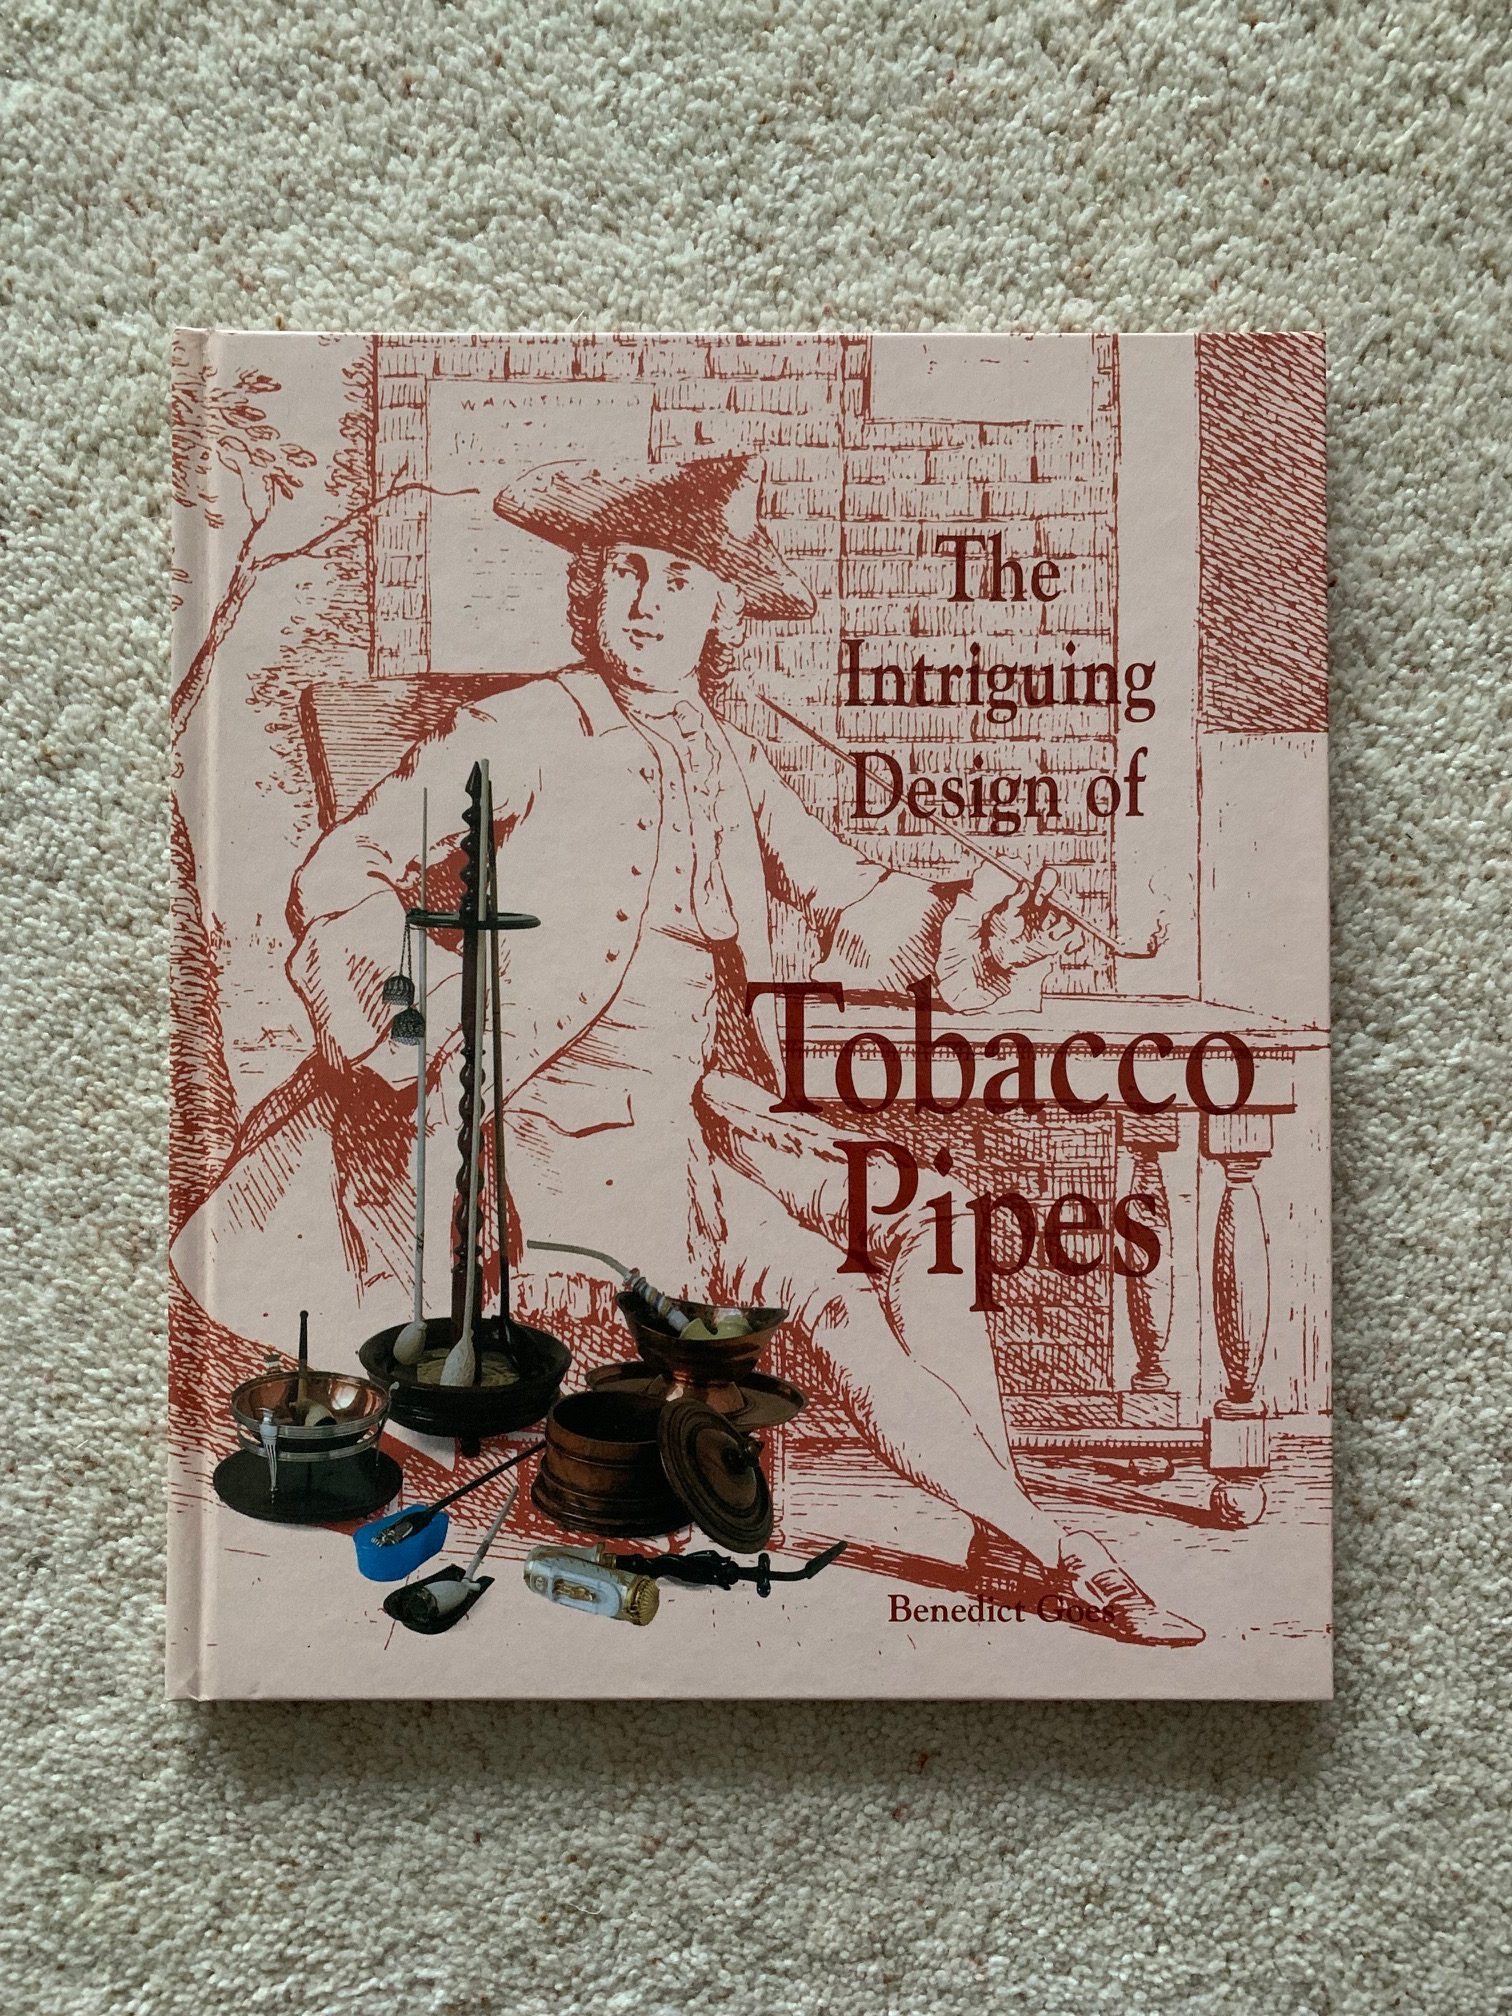 The Intriguing Design of Tobacco Pipes - B Goes Image